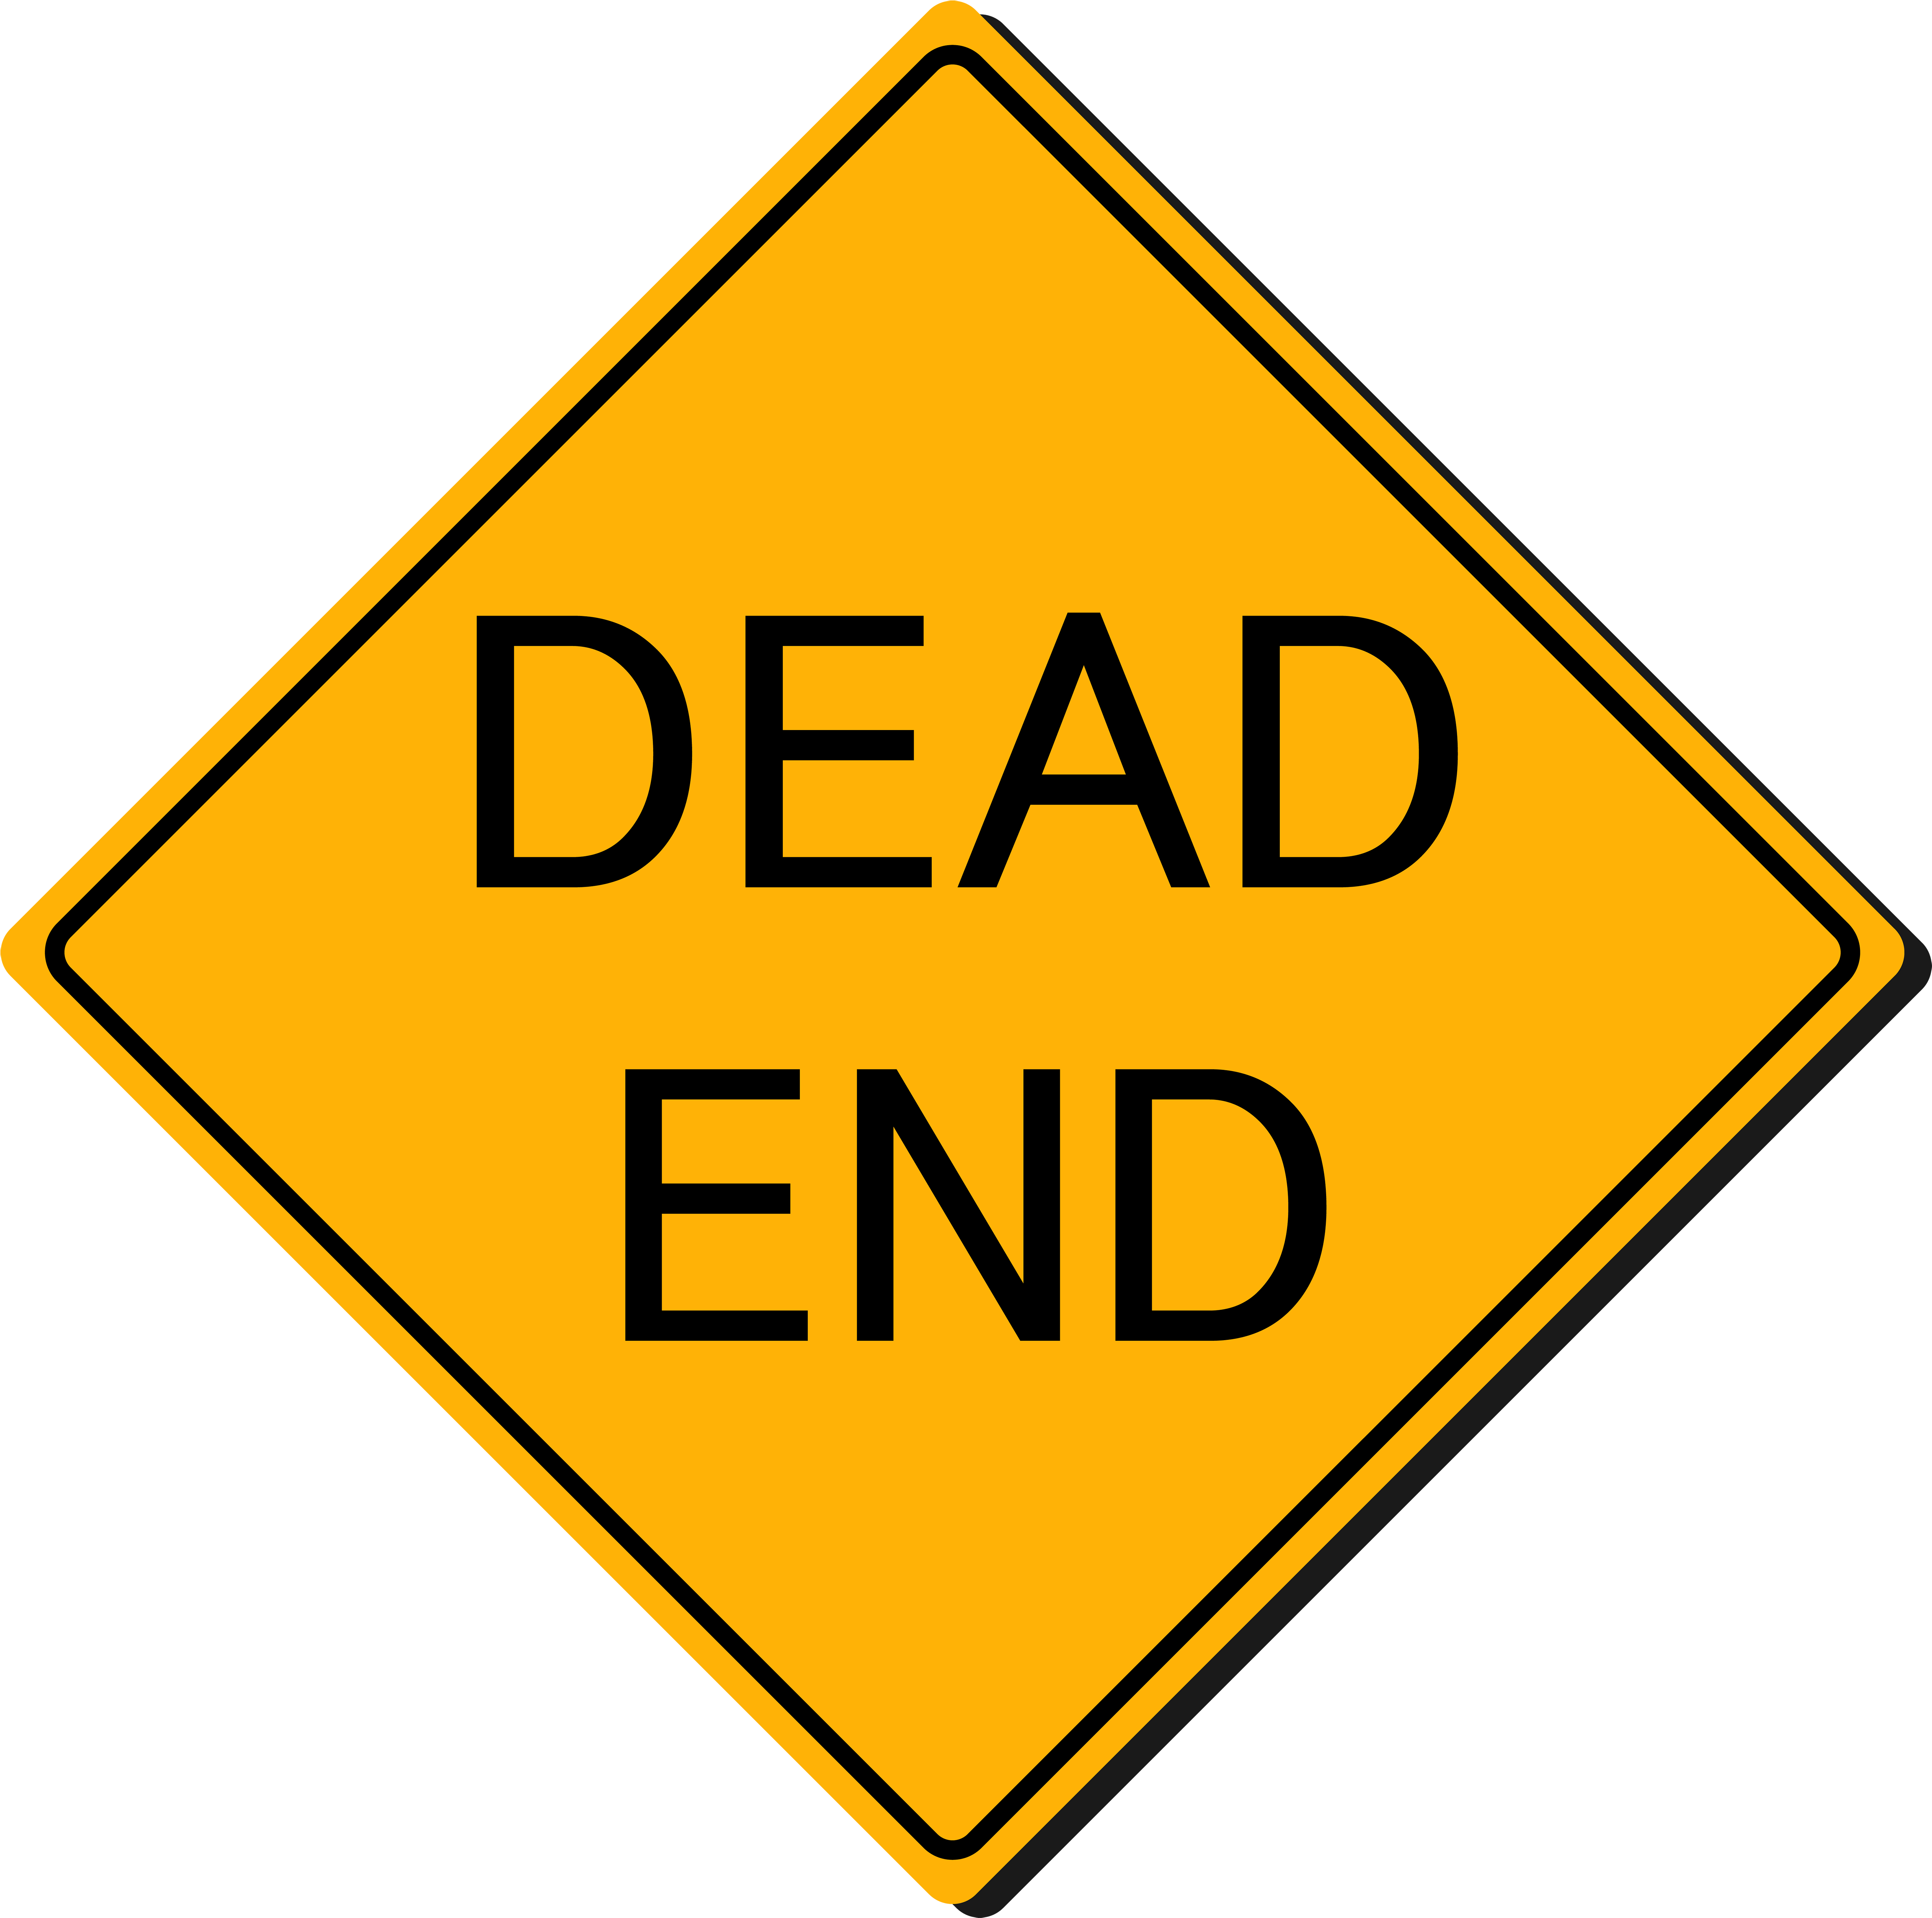 A Yellow Sign With Black Text